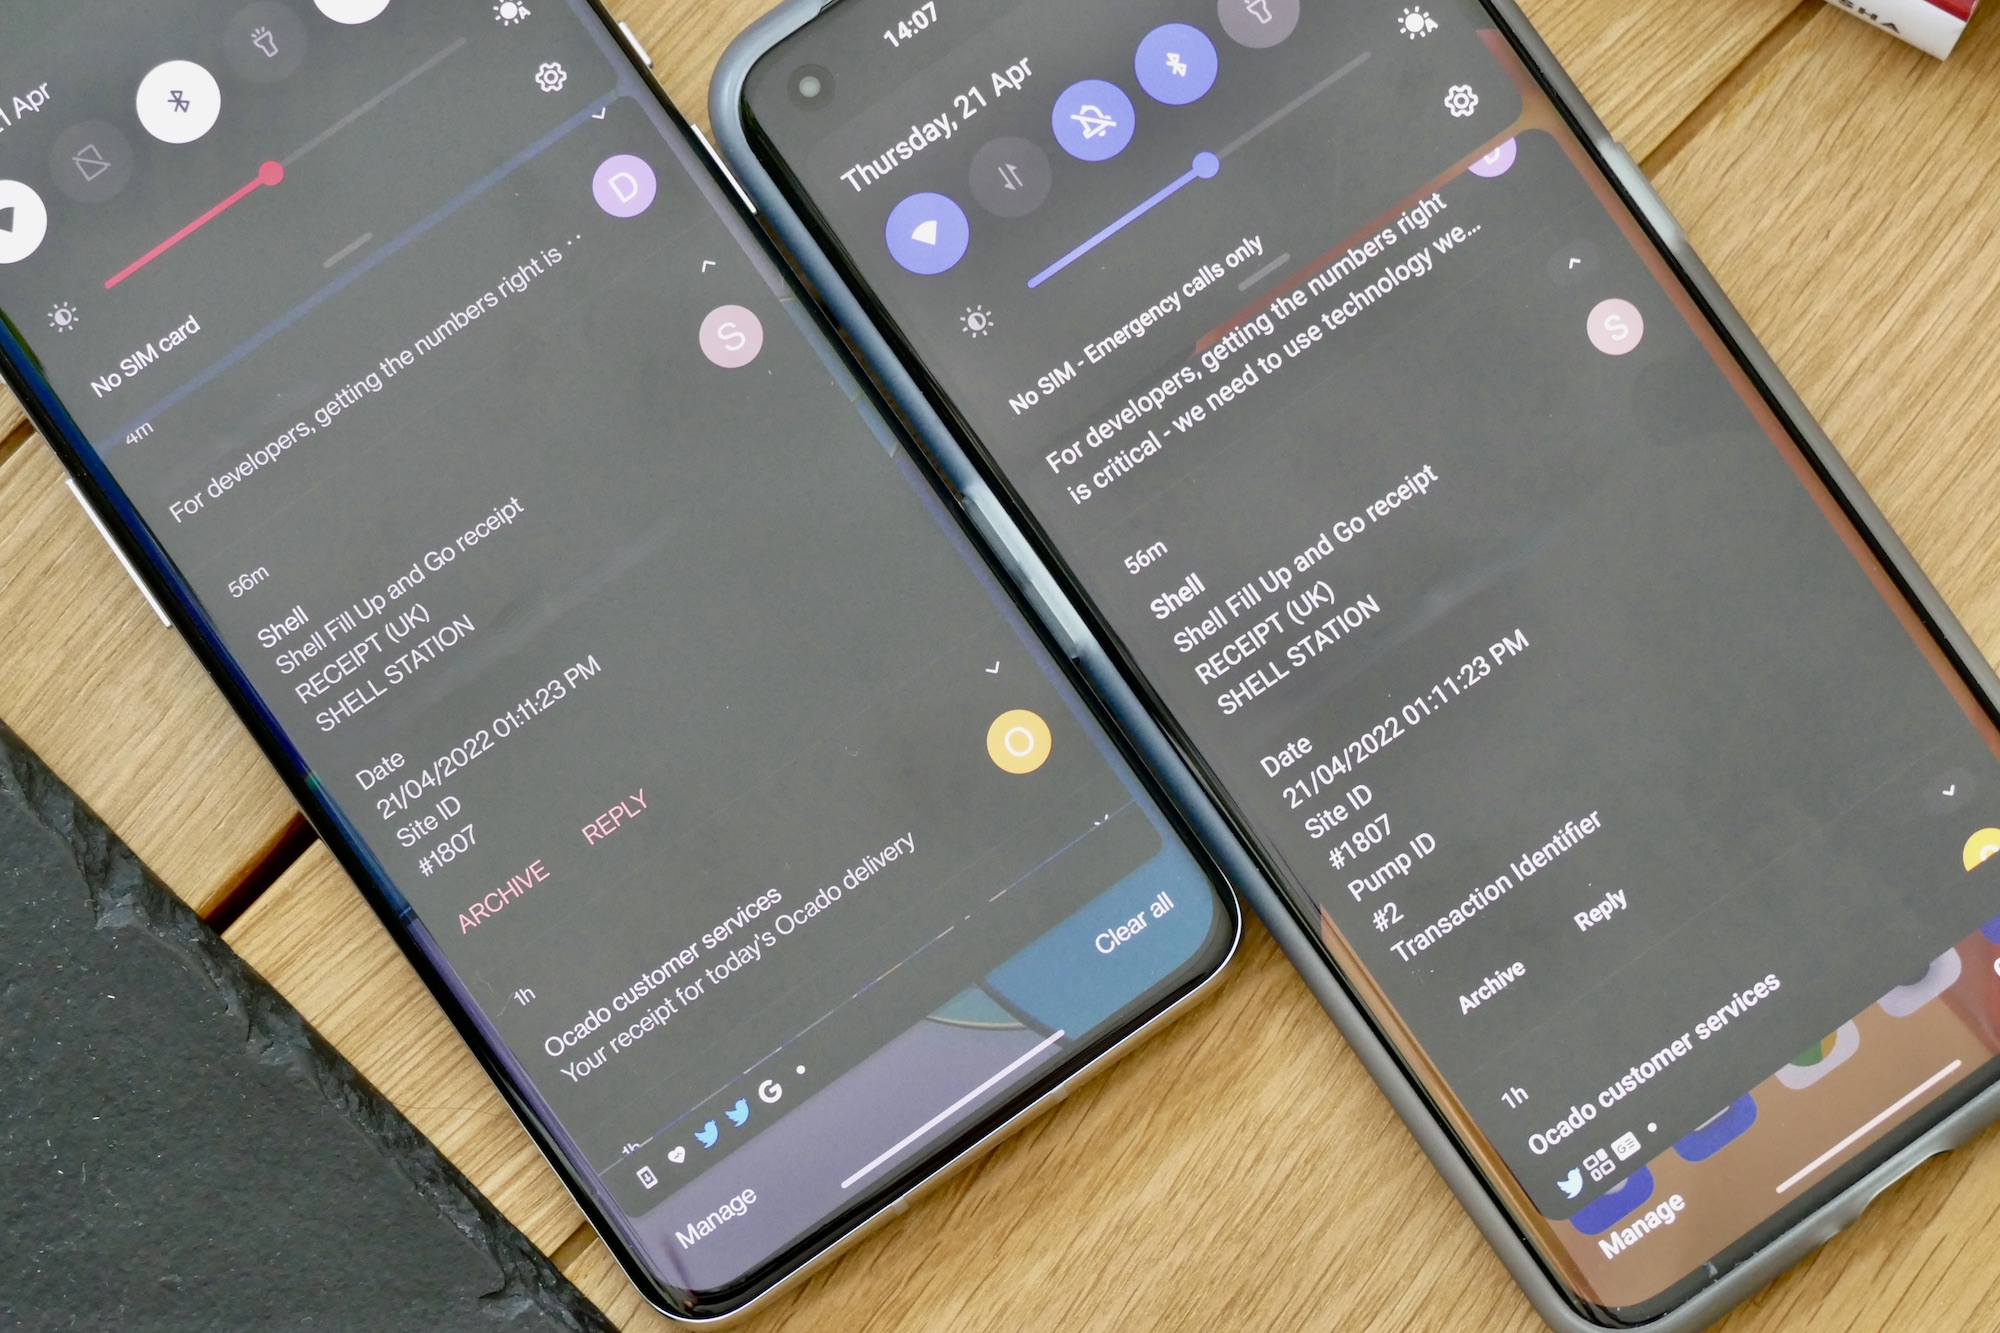 OxygenOS 11 and OxygenOS 12 notification details.